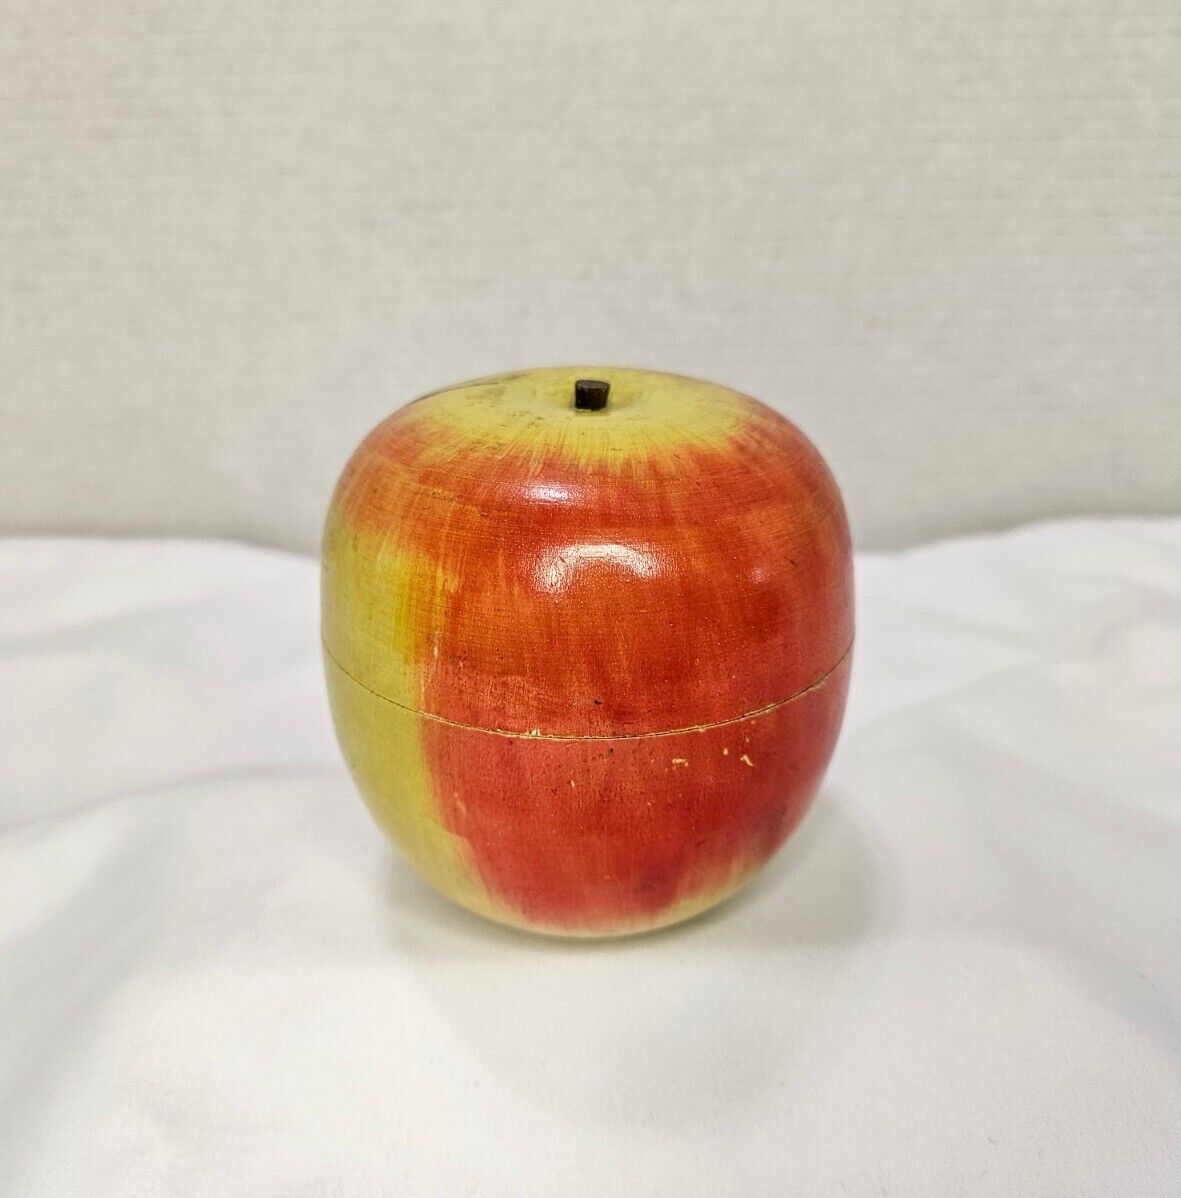 Antique Vintage Early 20th Century Painted Wooden Apple